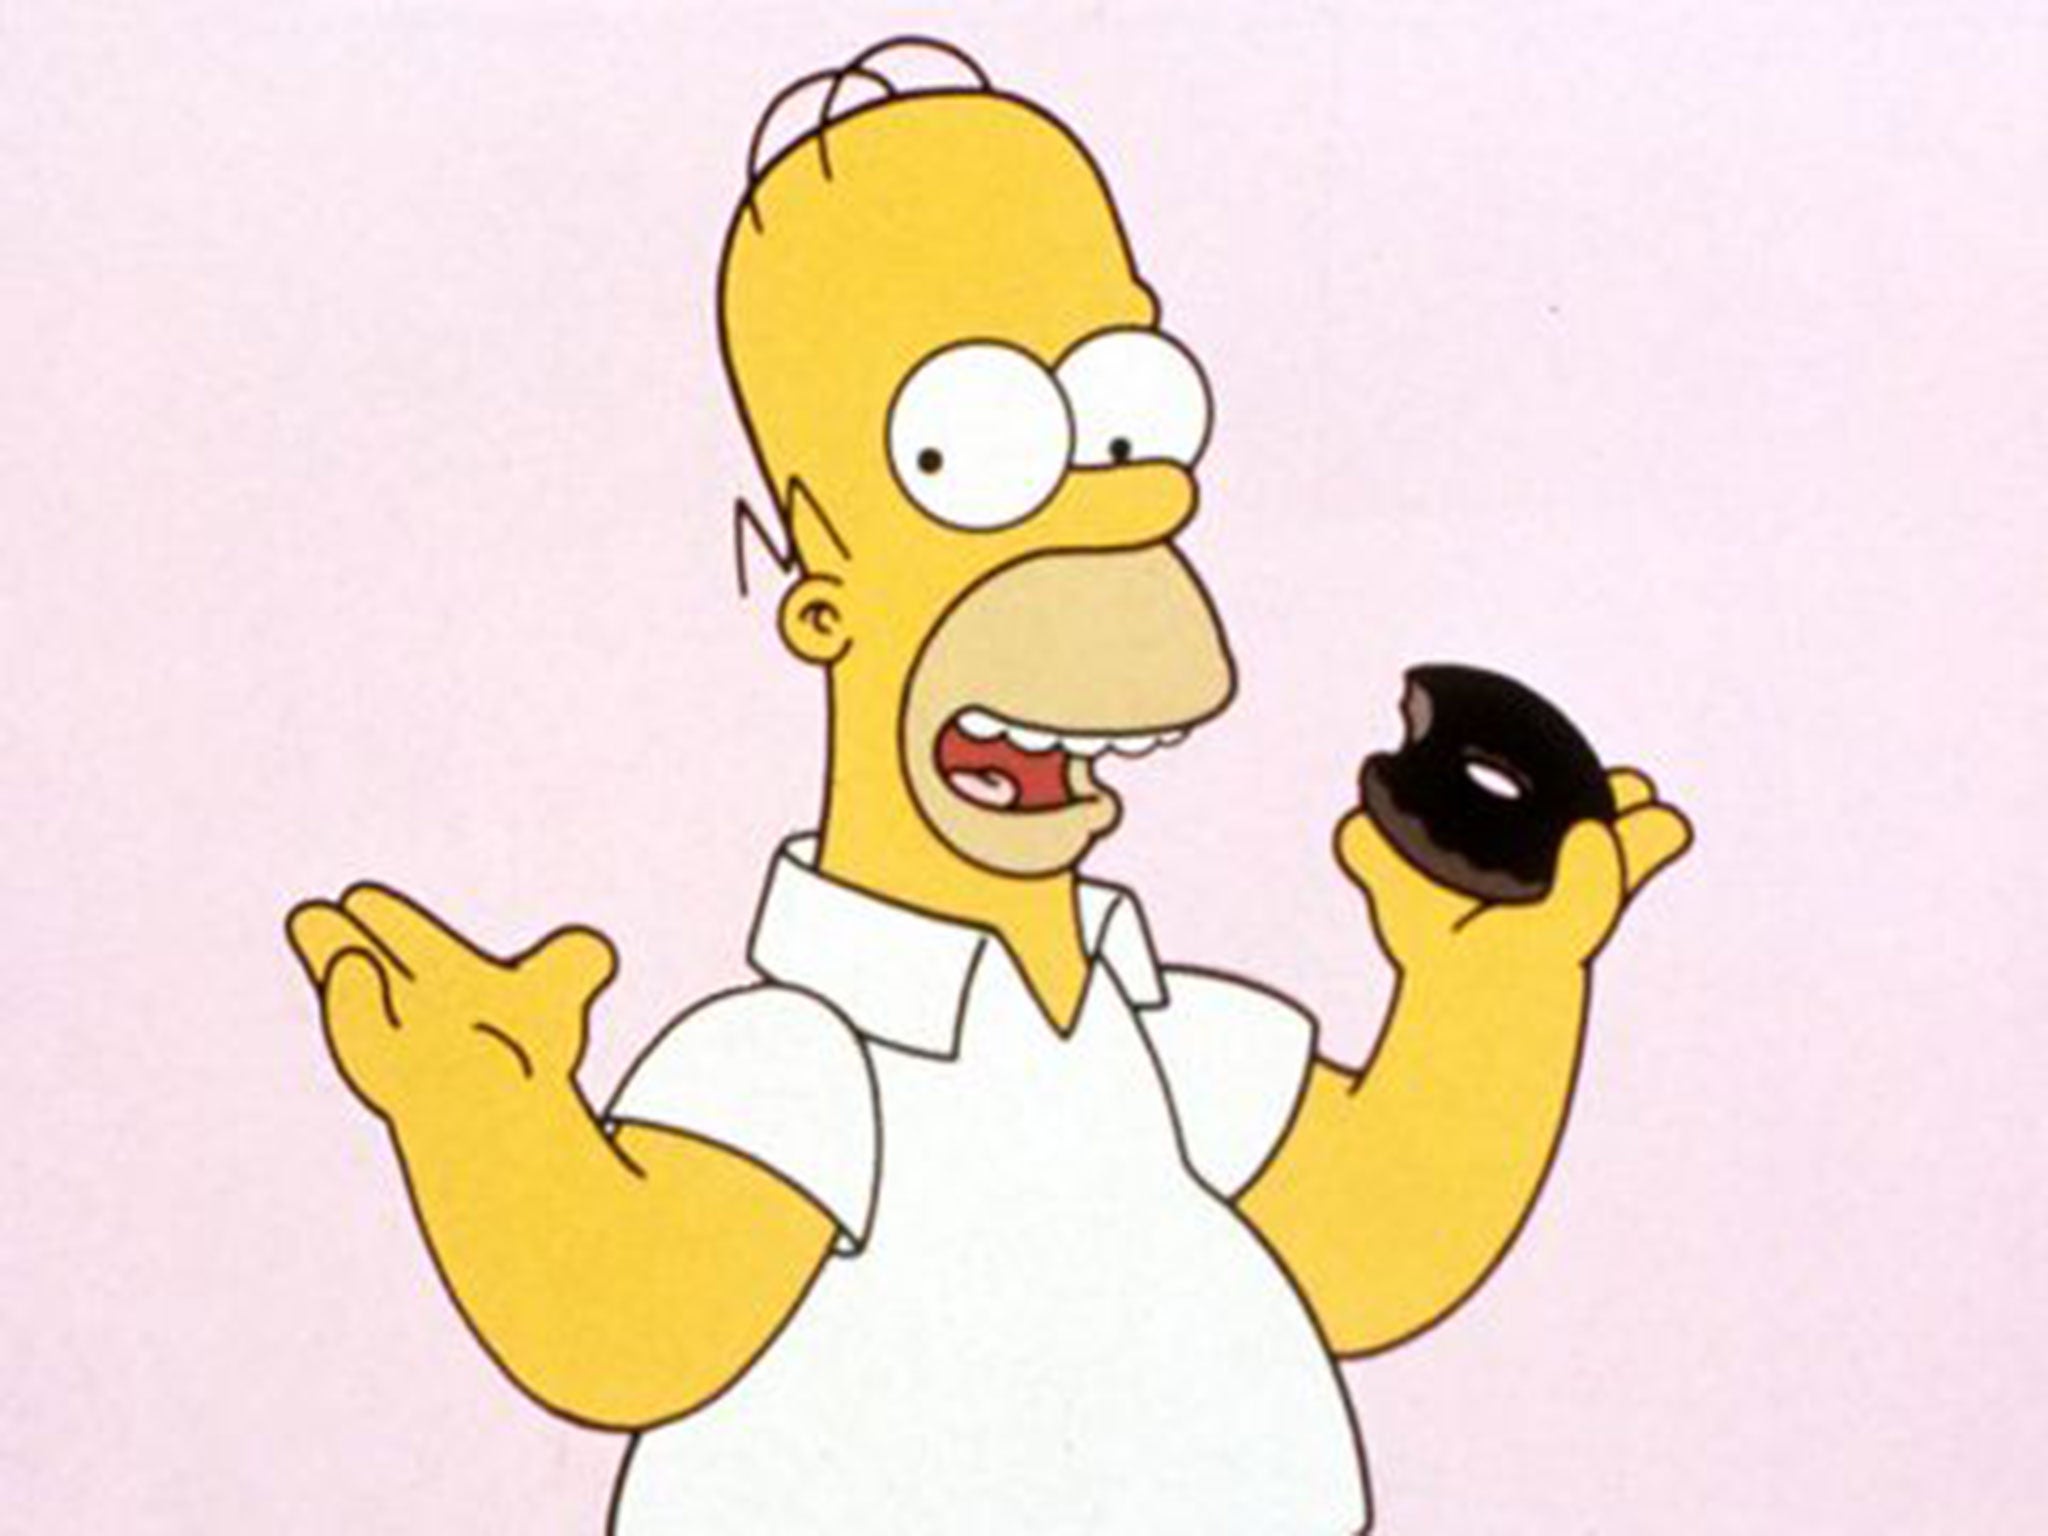 Homer Simpson conforms to the stereotype: the fifty-something male is overweight, comically unheroic and cartoonish